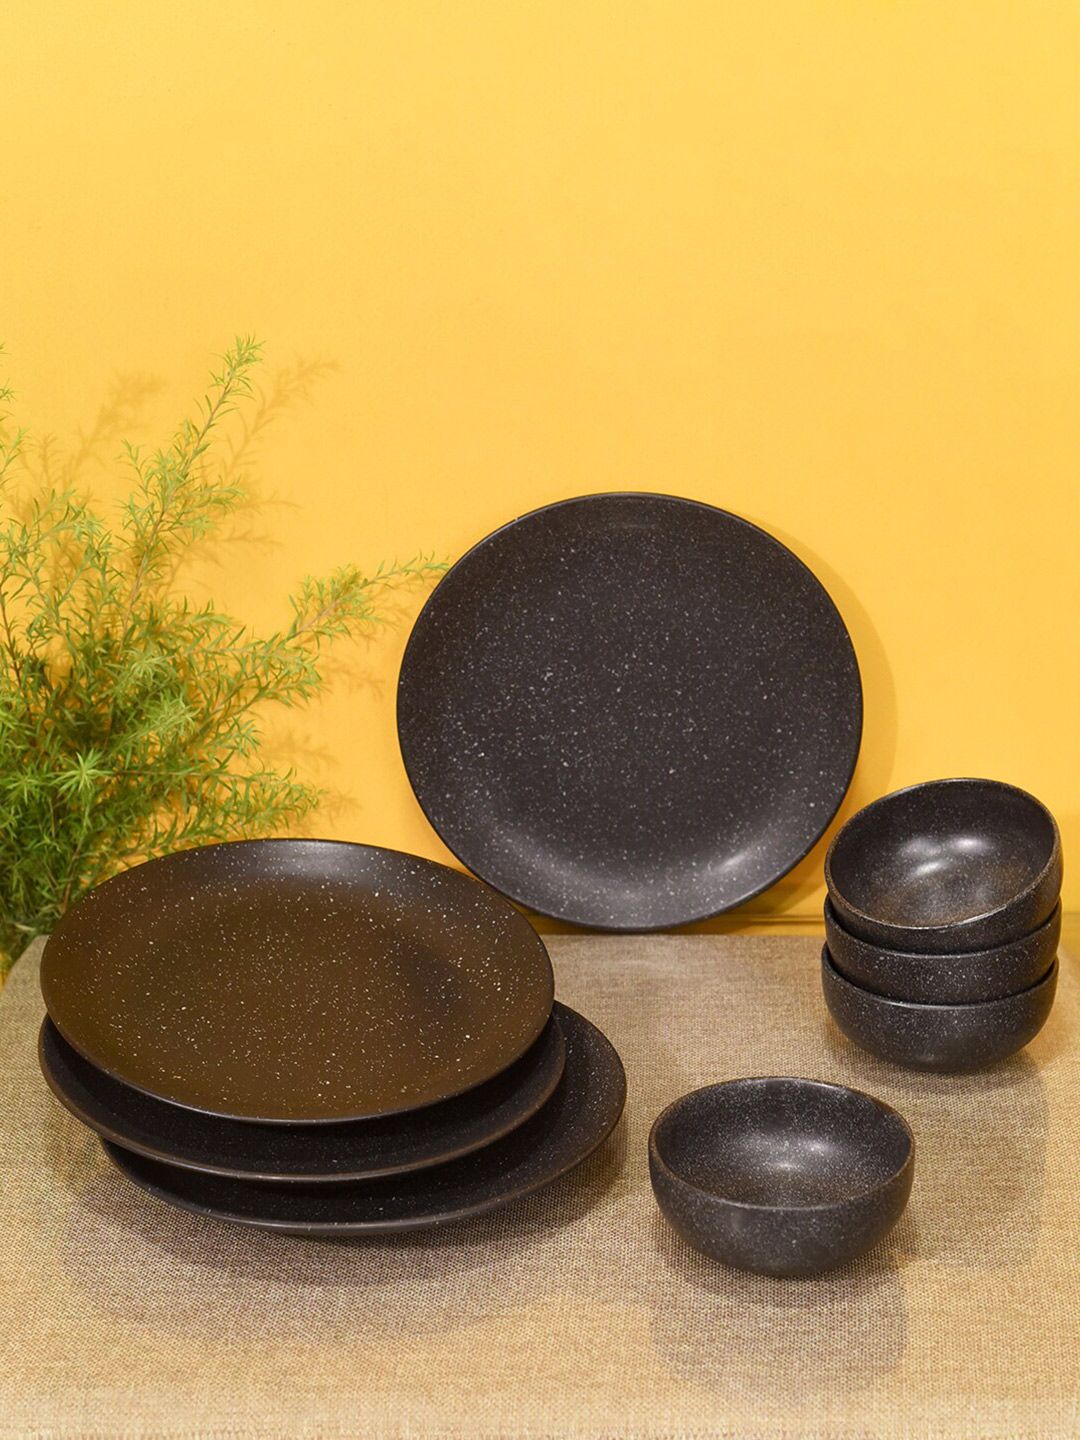 AAKRITI ART CREATIONS Set of 8 Black & White Textured Ceramic Matte Plates and Bowls Price in India